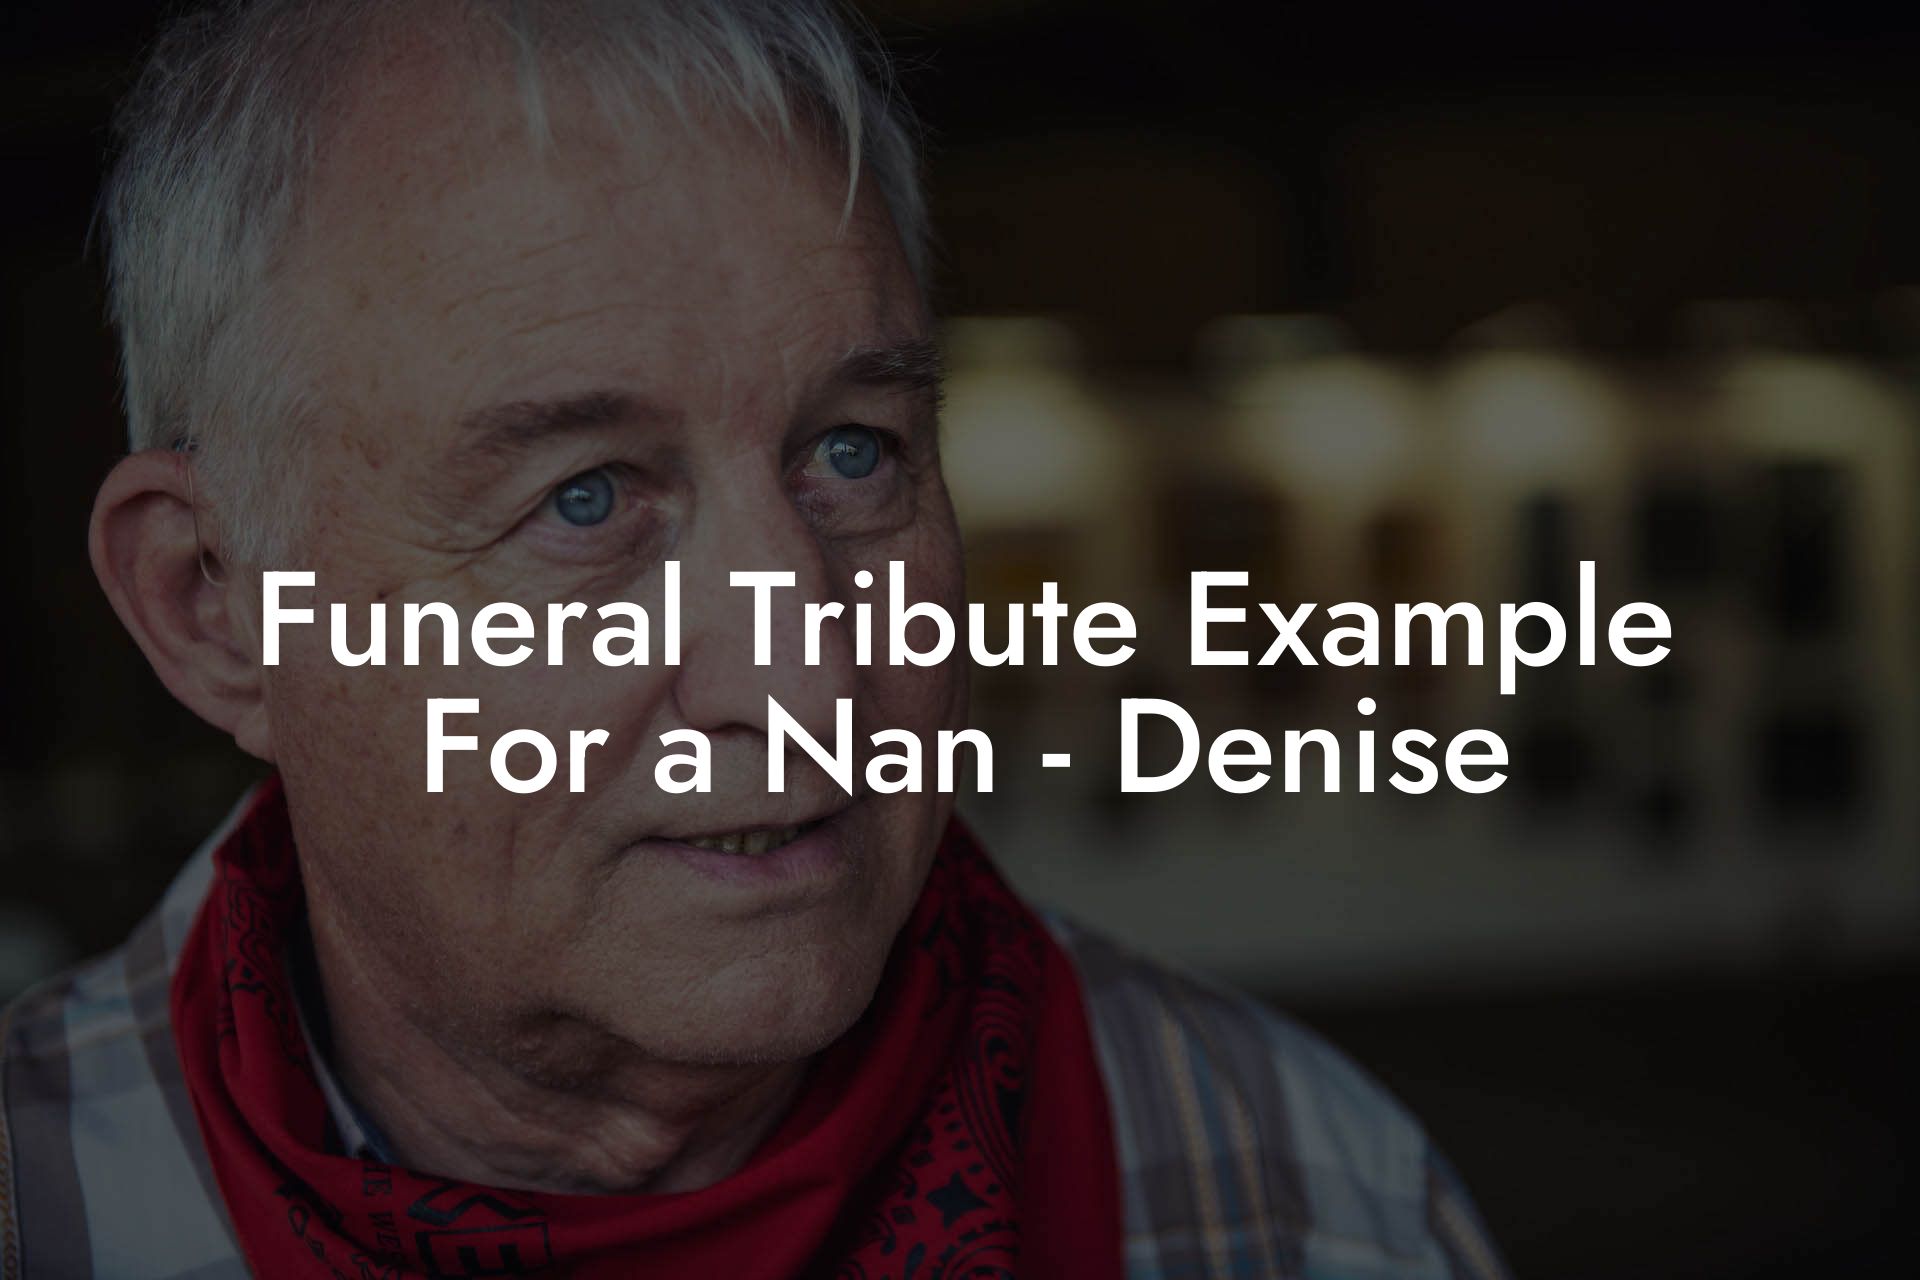 Funeral Tribute Example For a Nan - Denise